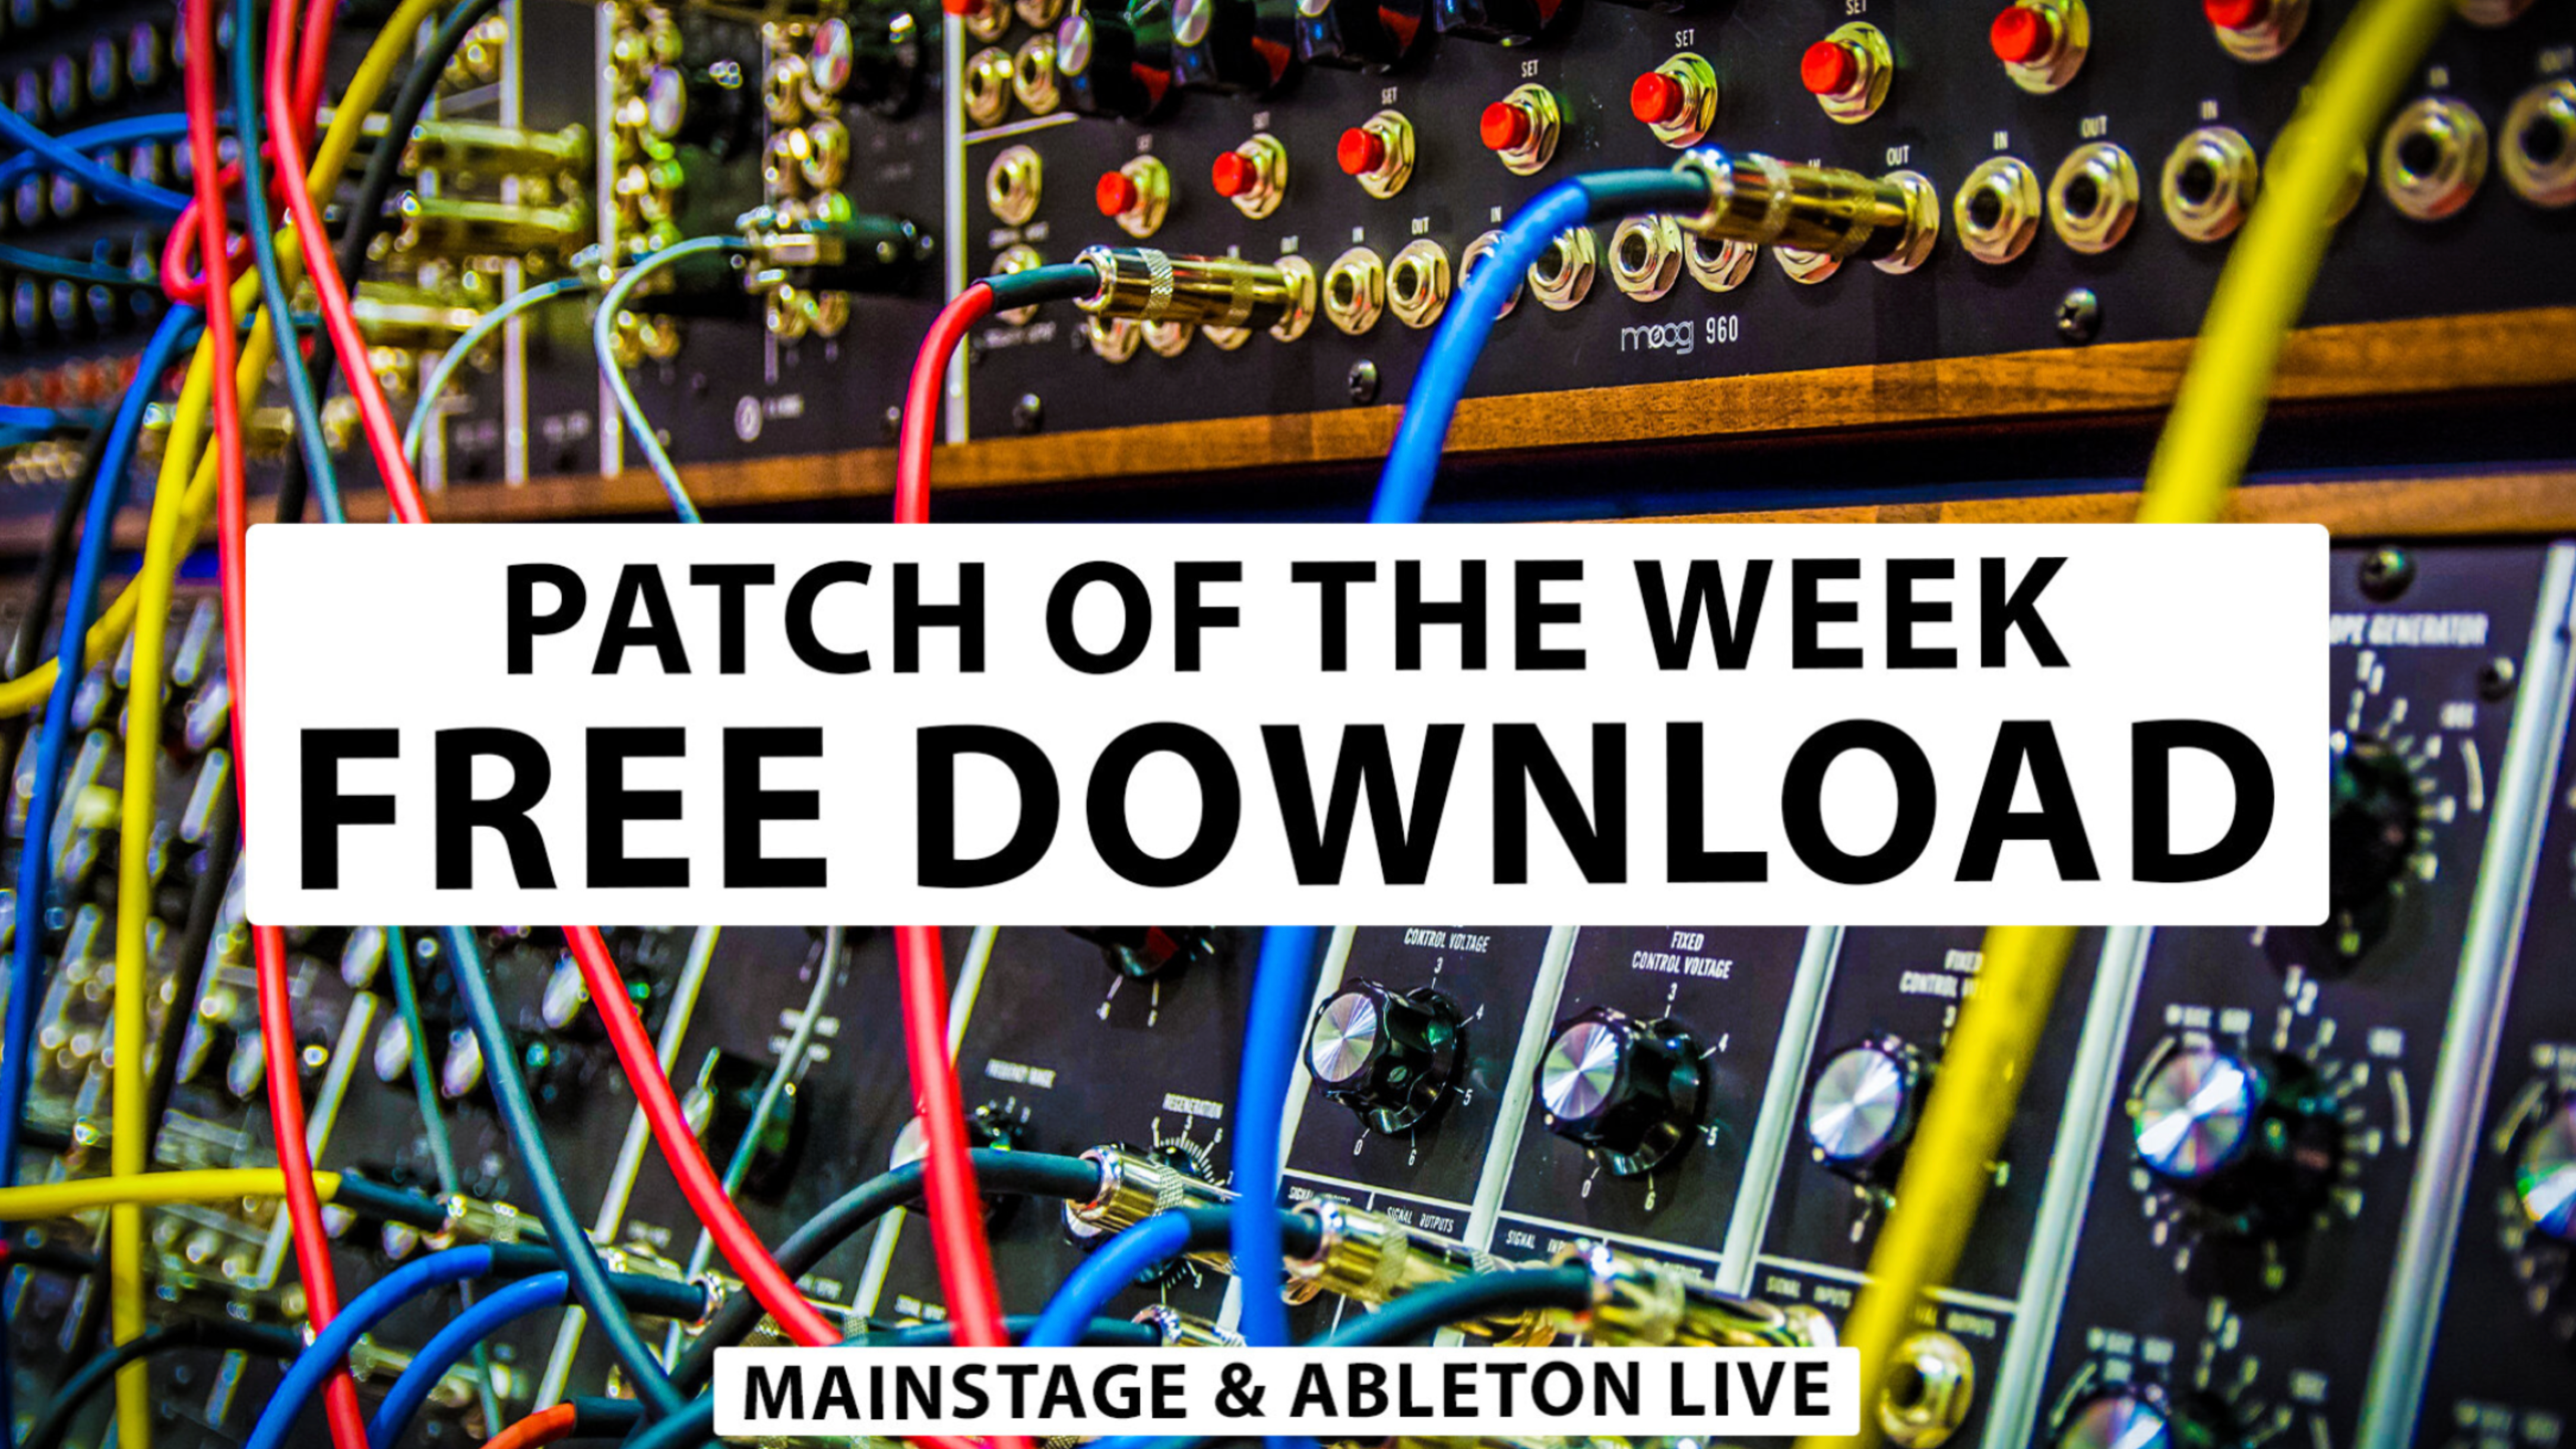 Dancing Candles Lead - Free MainStage & Ableton Worship Patch!